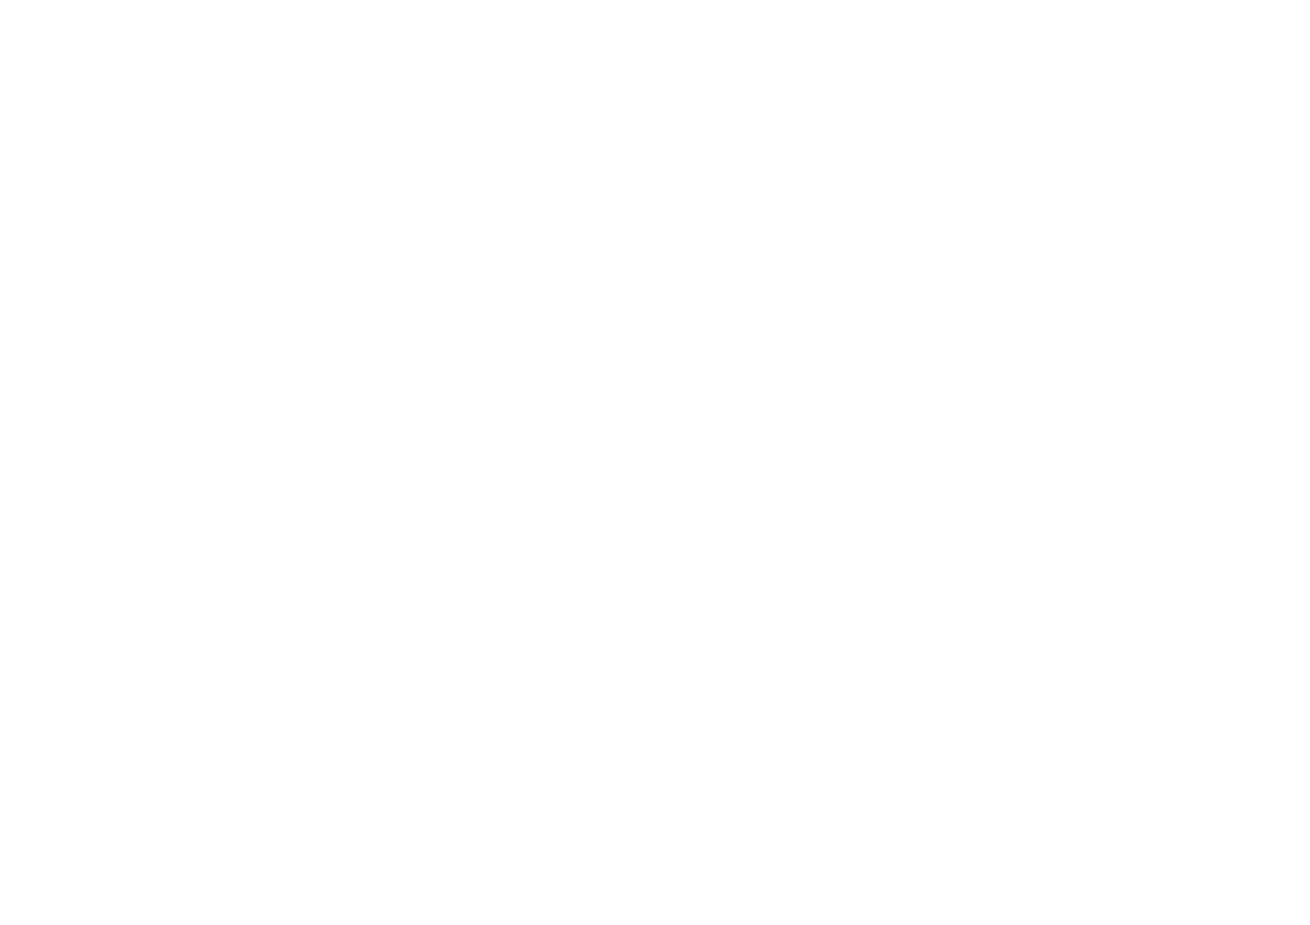 A table comparing machine learning model performance with four distinct models listed by name, size in MB, and proficiency in German and English tasks